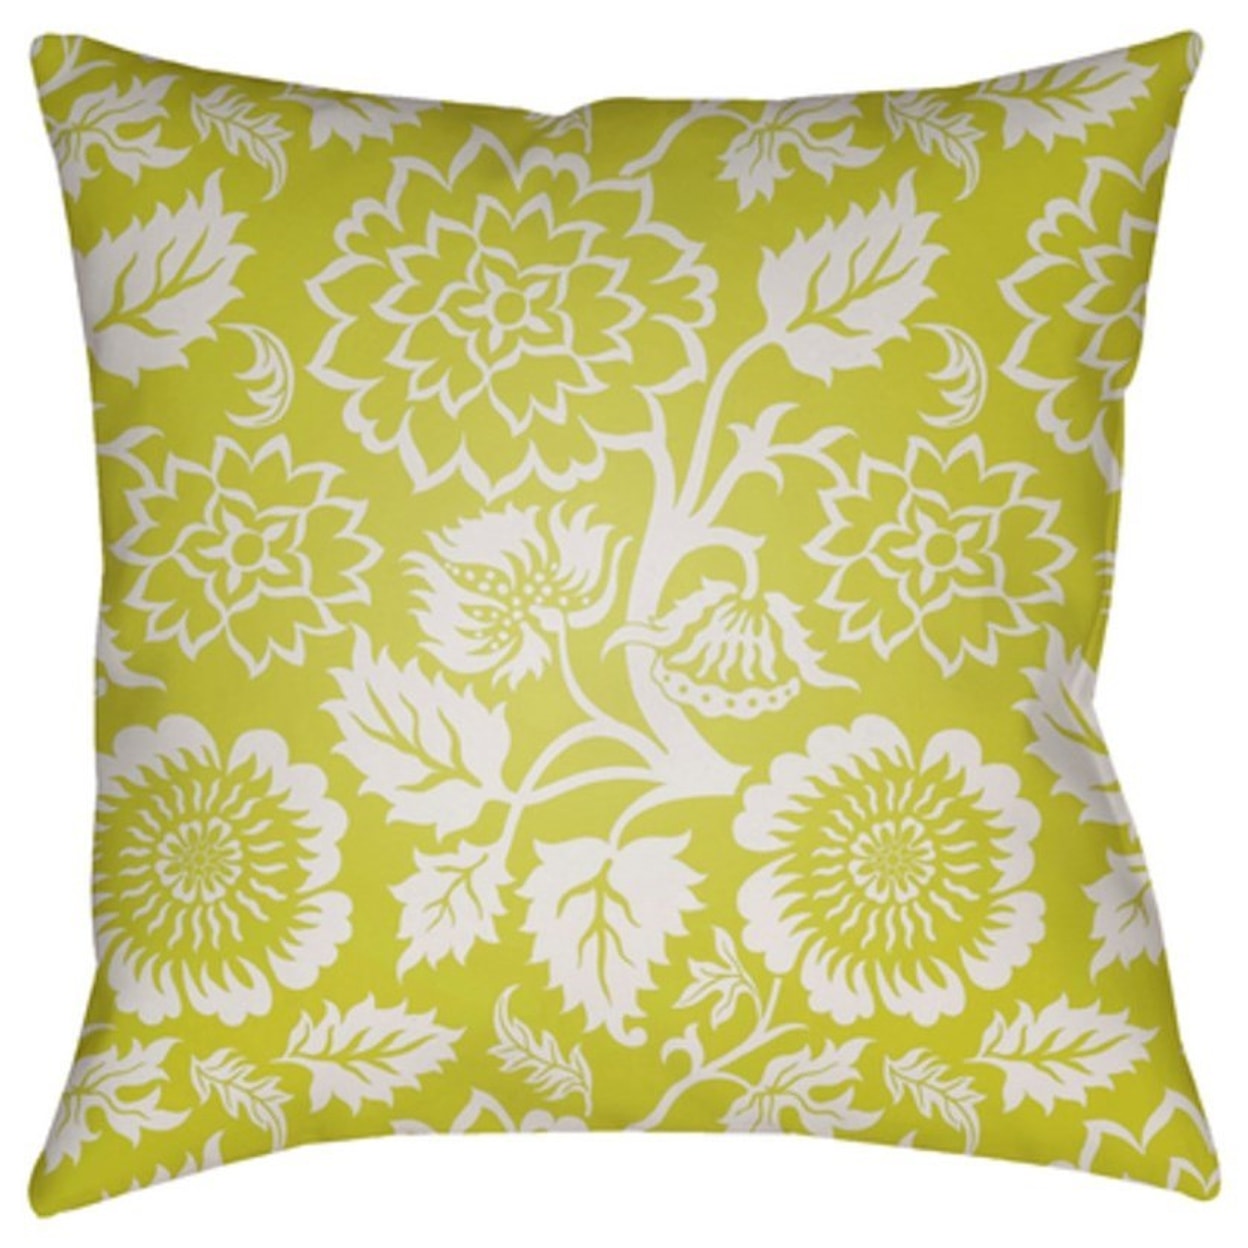 Ruby-Gordon Accents Moody Floral Pillow